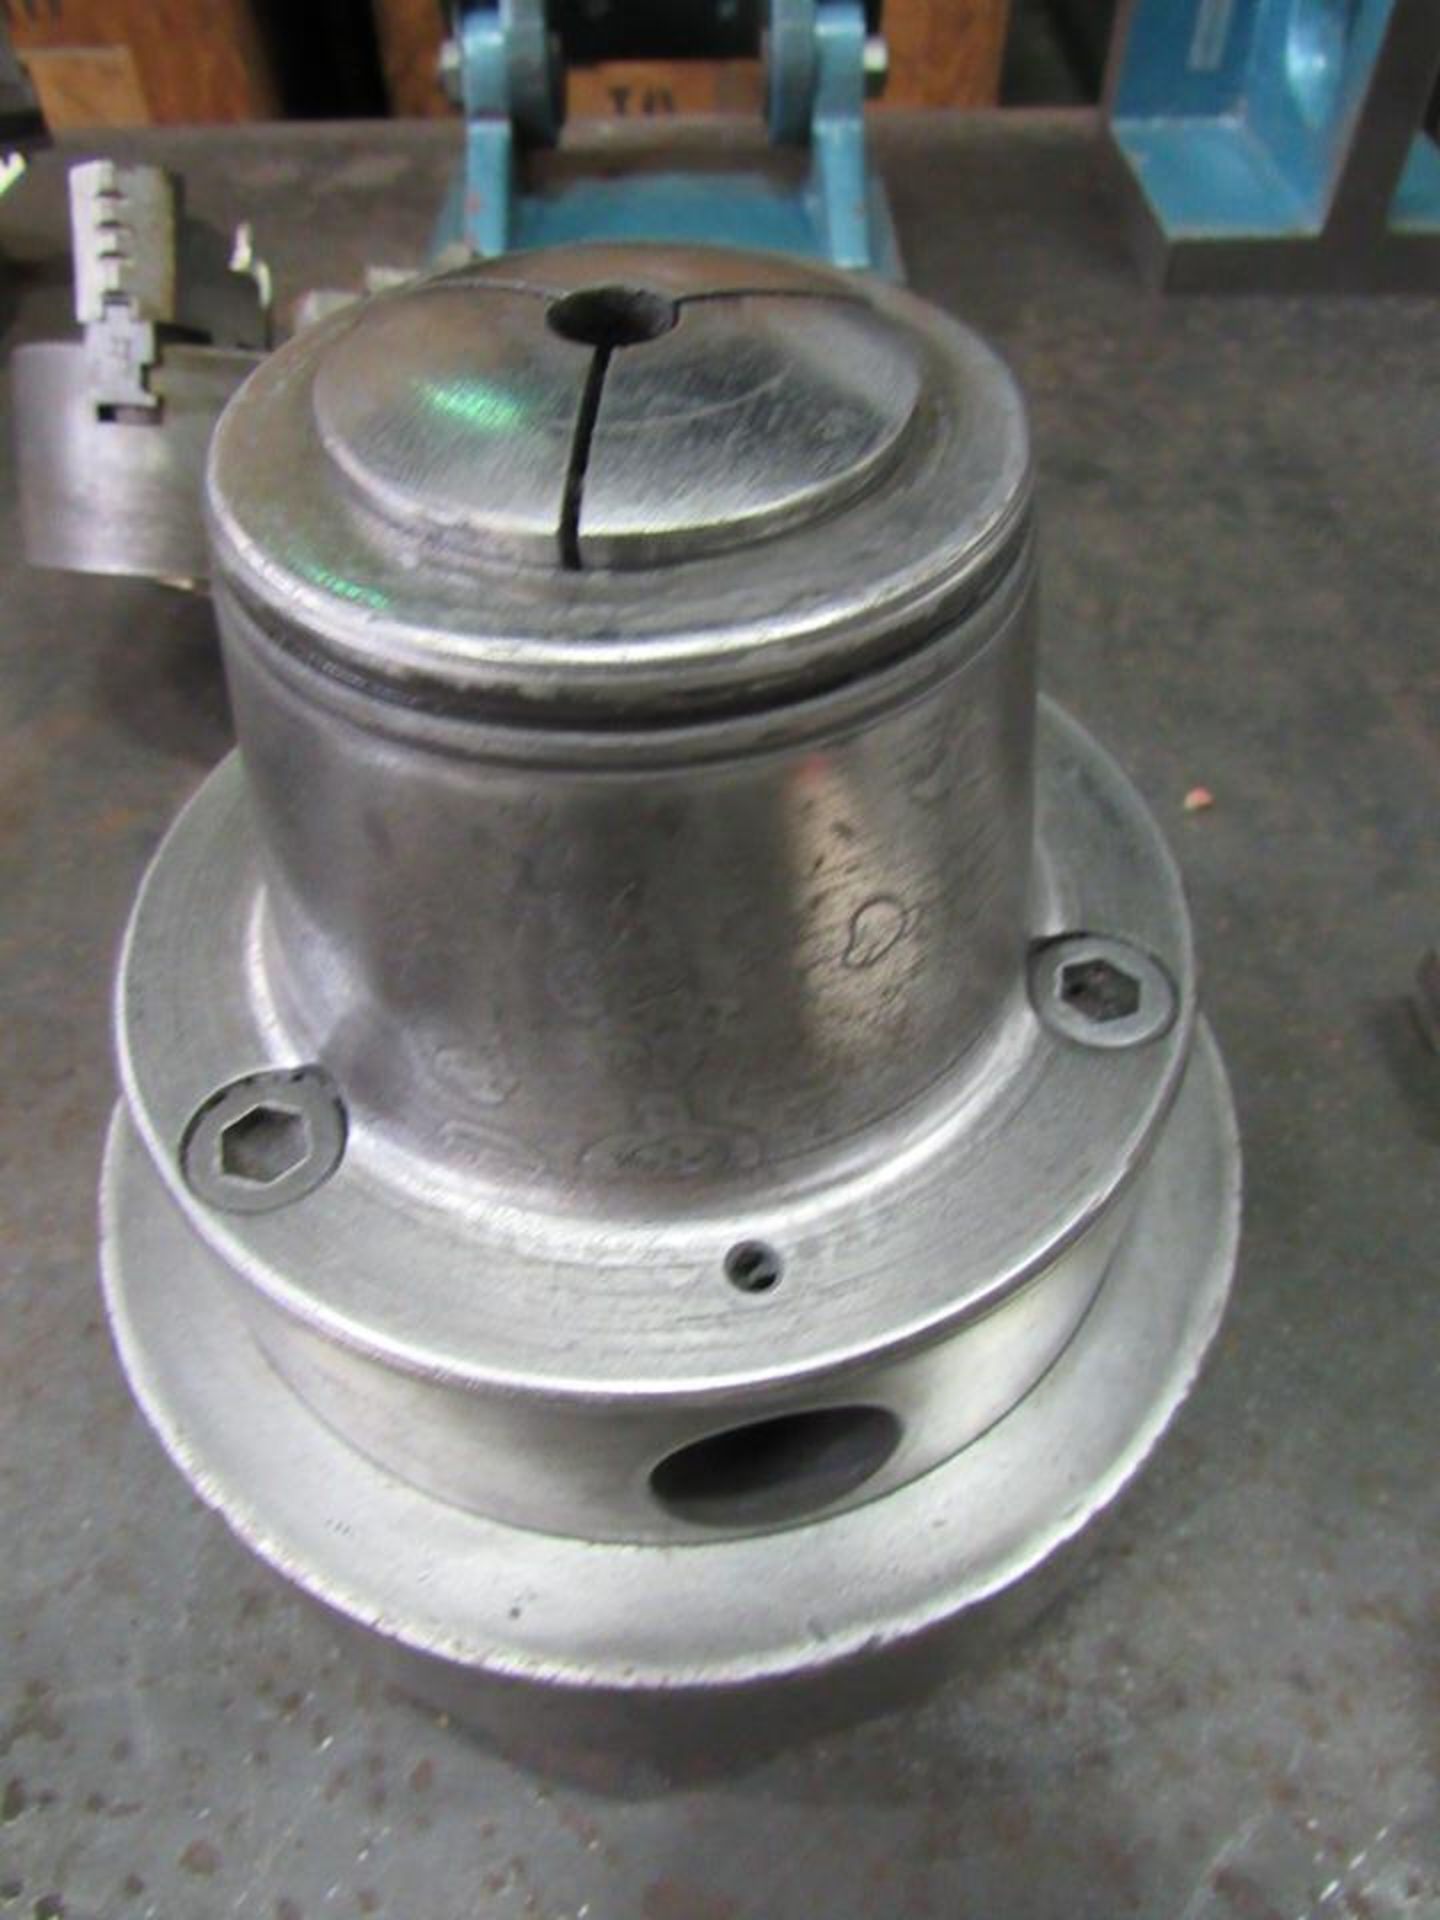 7" Collet Chuck, 1/2" collet, camlock back, S/N NA (LOCATION: 3603 Melva Street, Houston TX 77020)